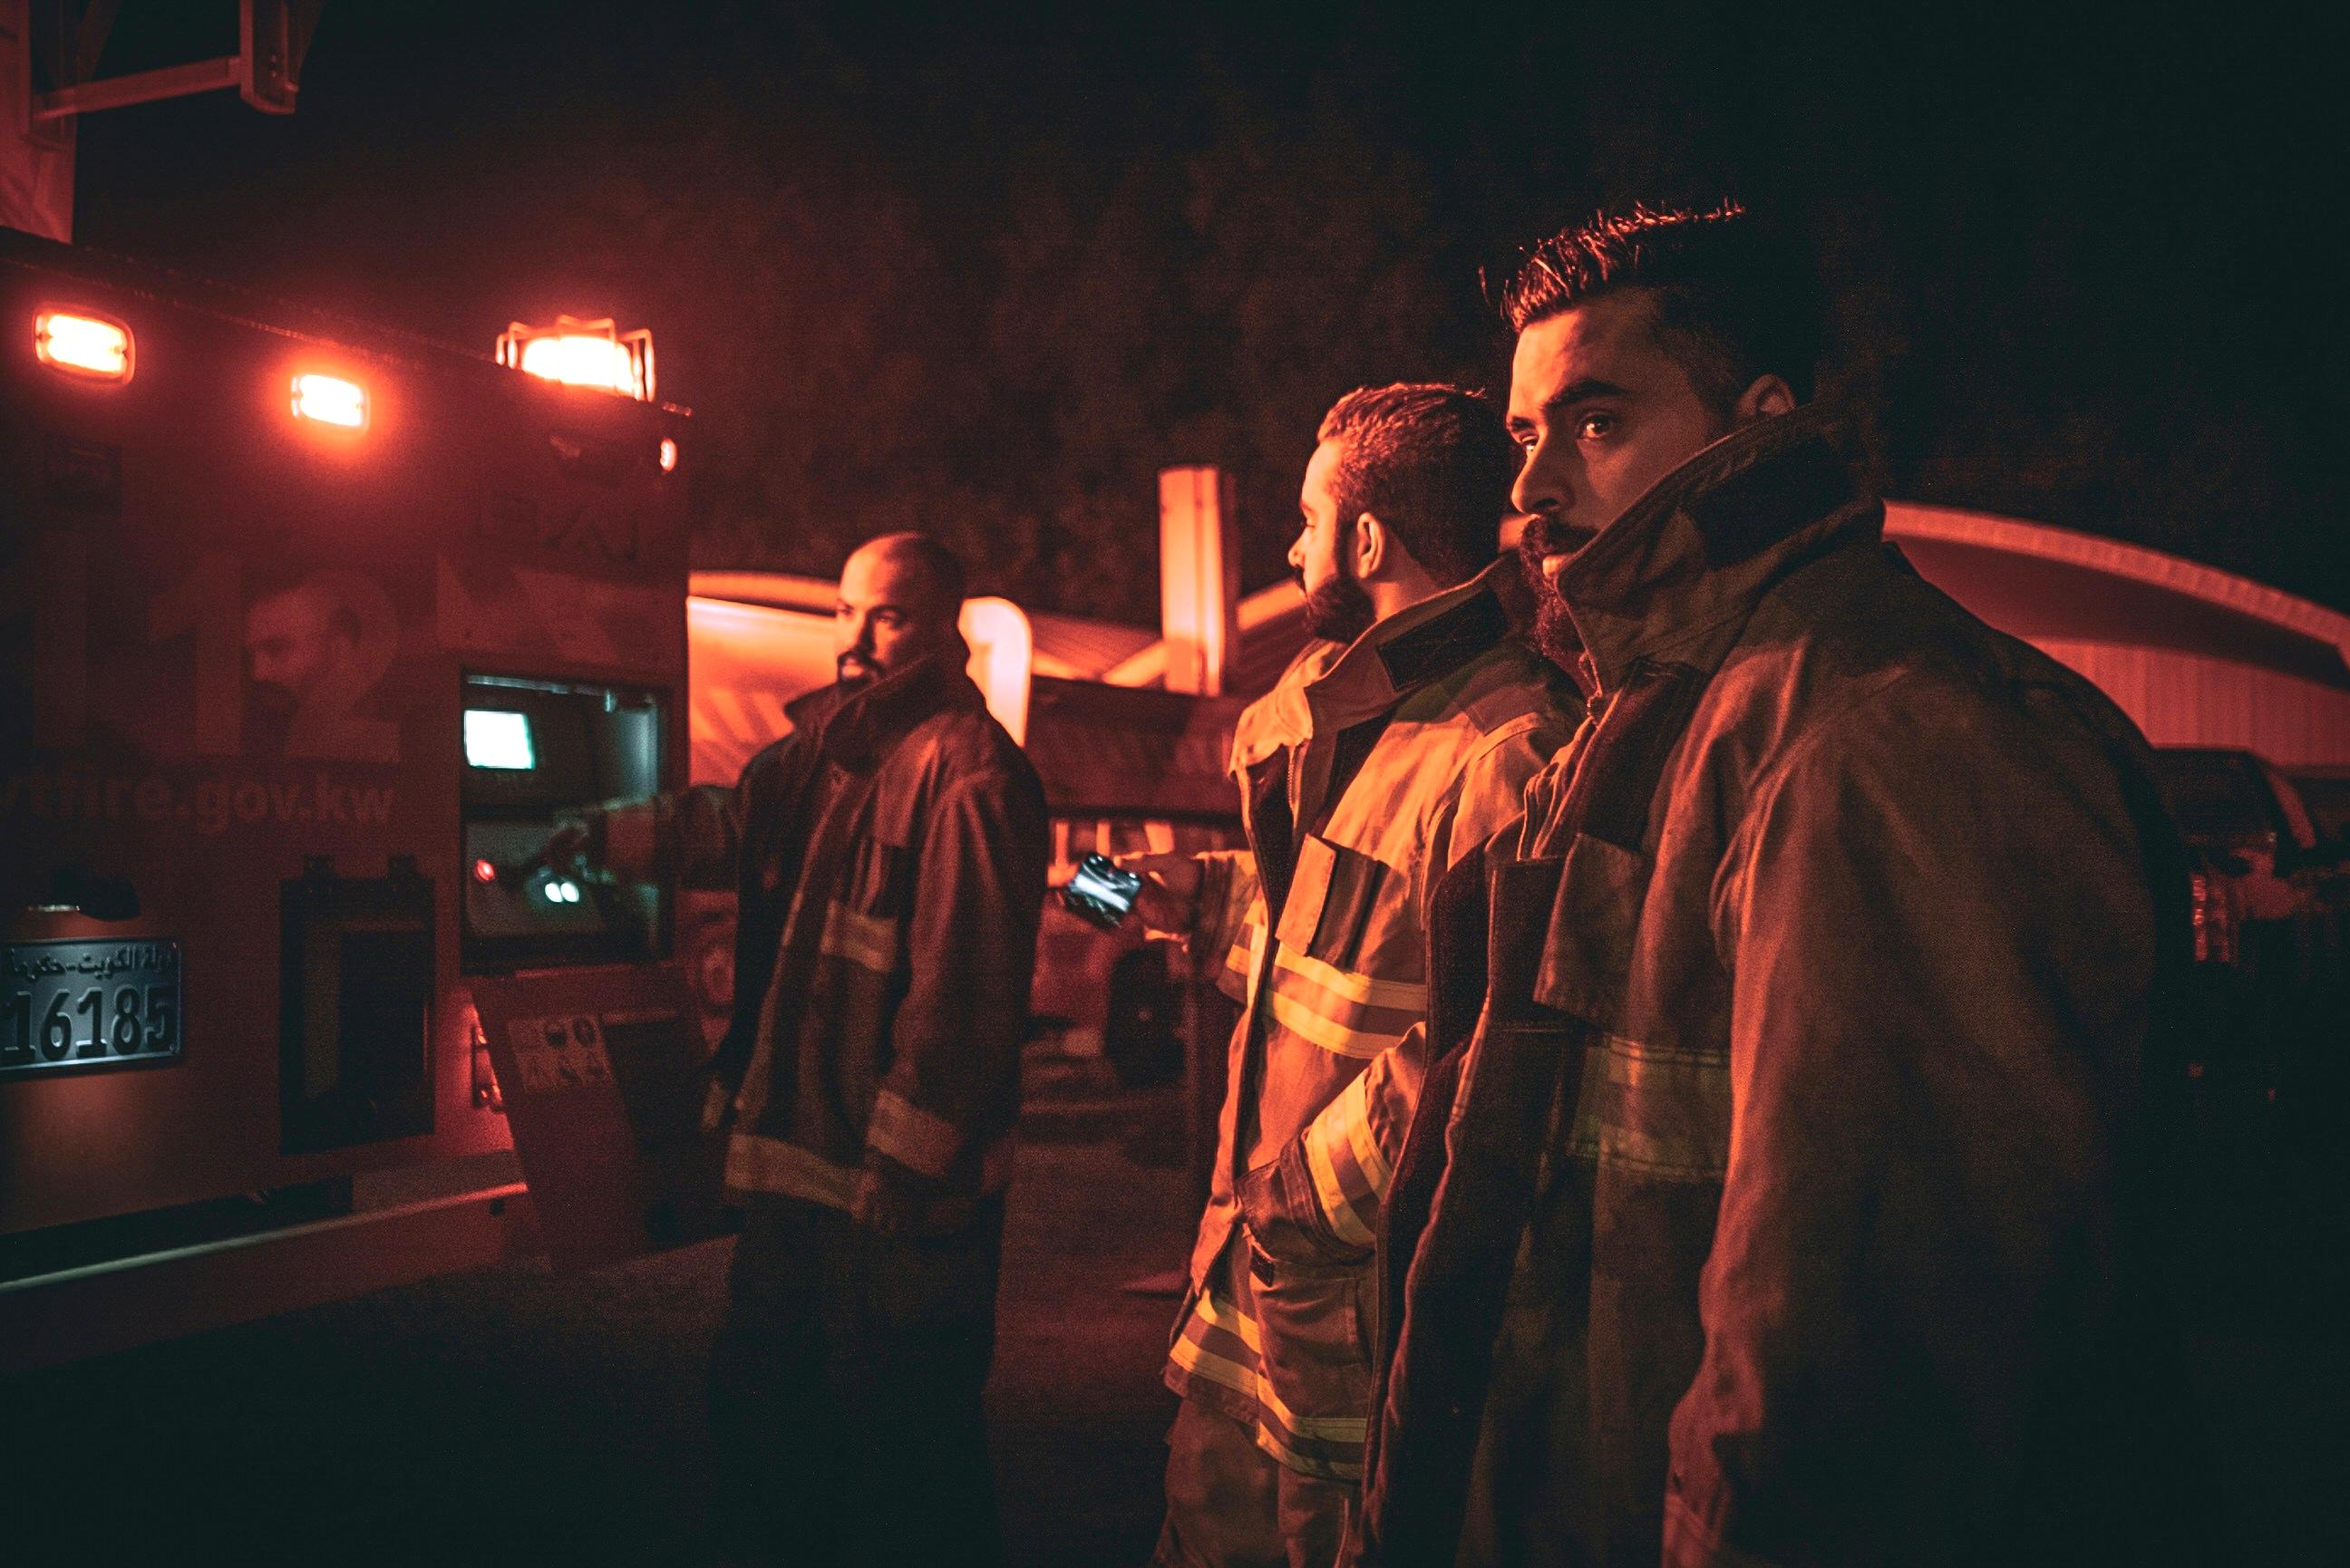 From PTSD to disconnection from communities, climate change is exacerbating the risks bushfires pose to firefighters’ health. : Unsplash: JC Gellidon Free to use